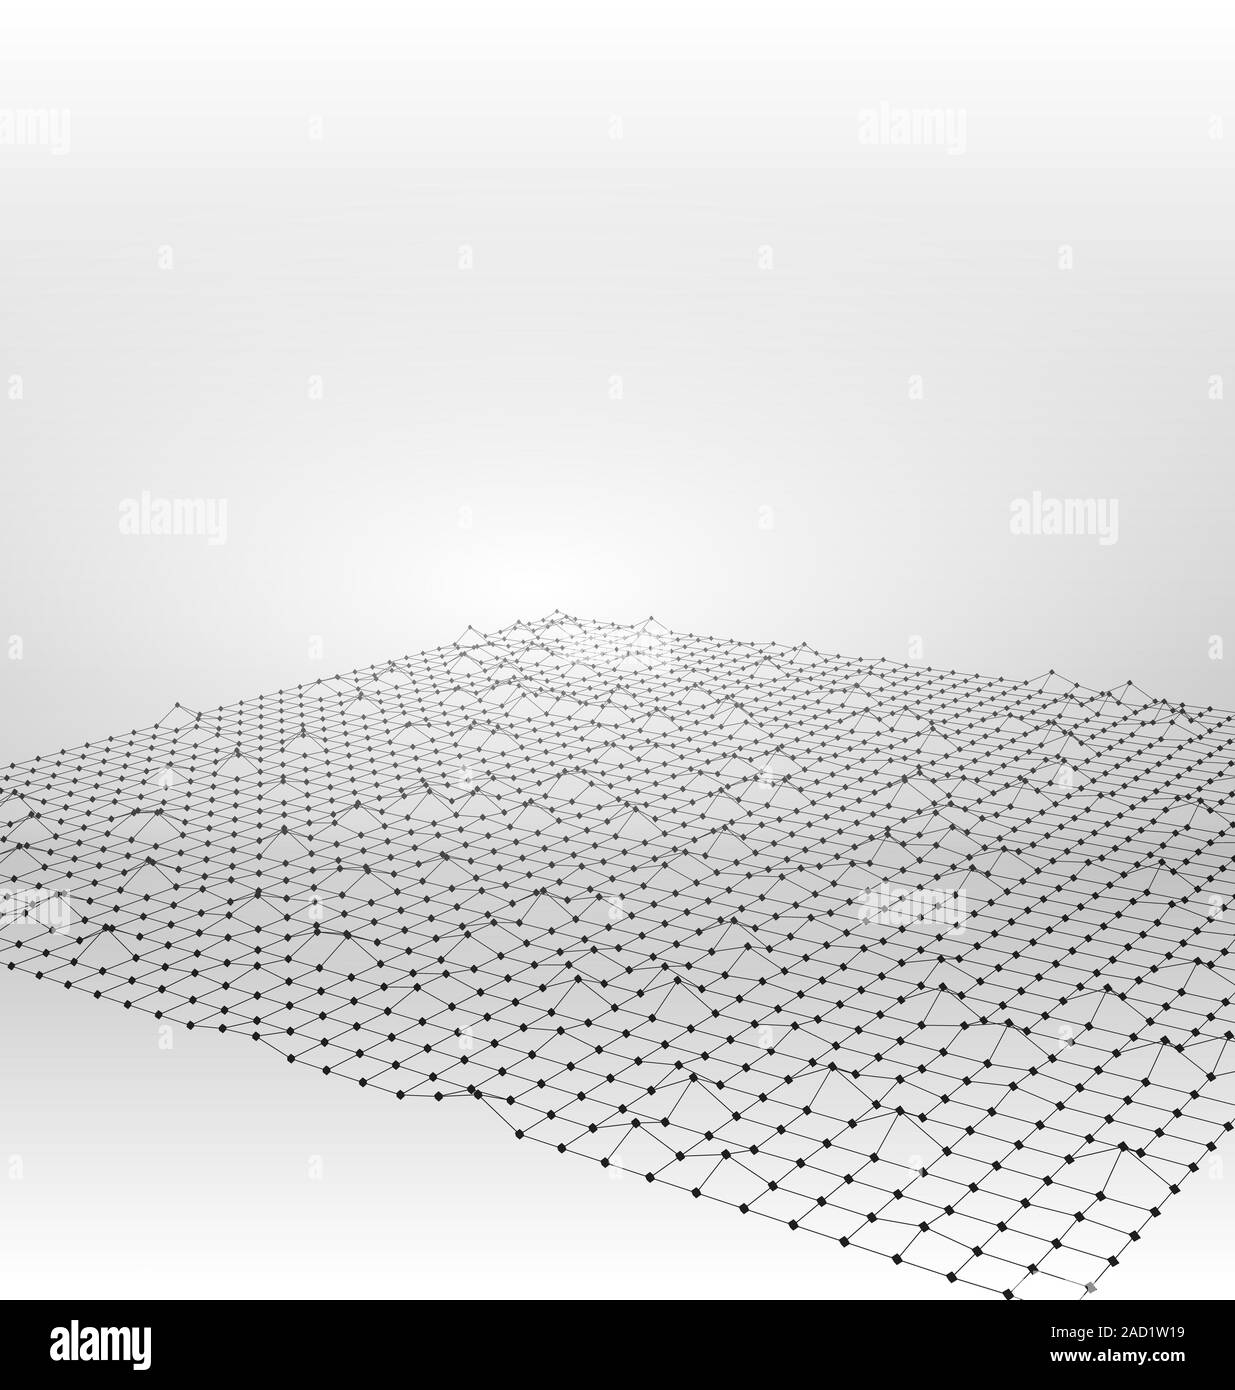 Wireframe Area Mesh Polygonal Surface Stock Photo